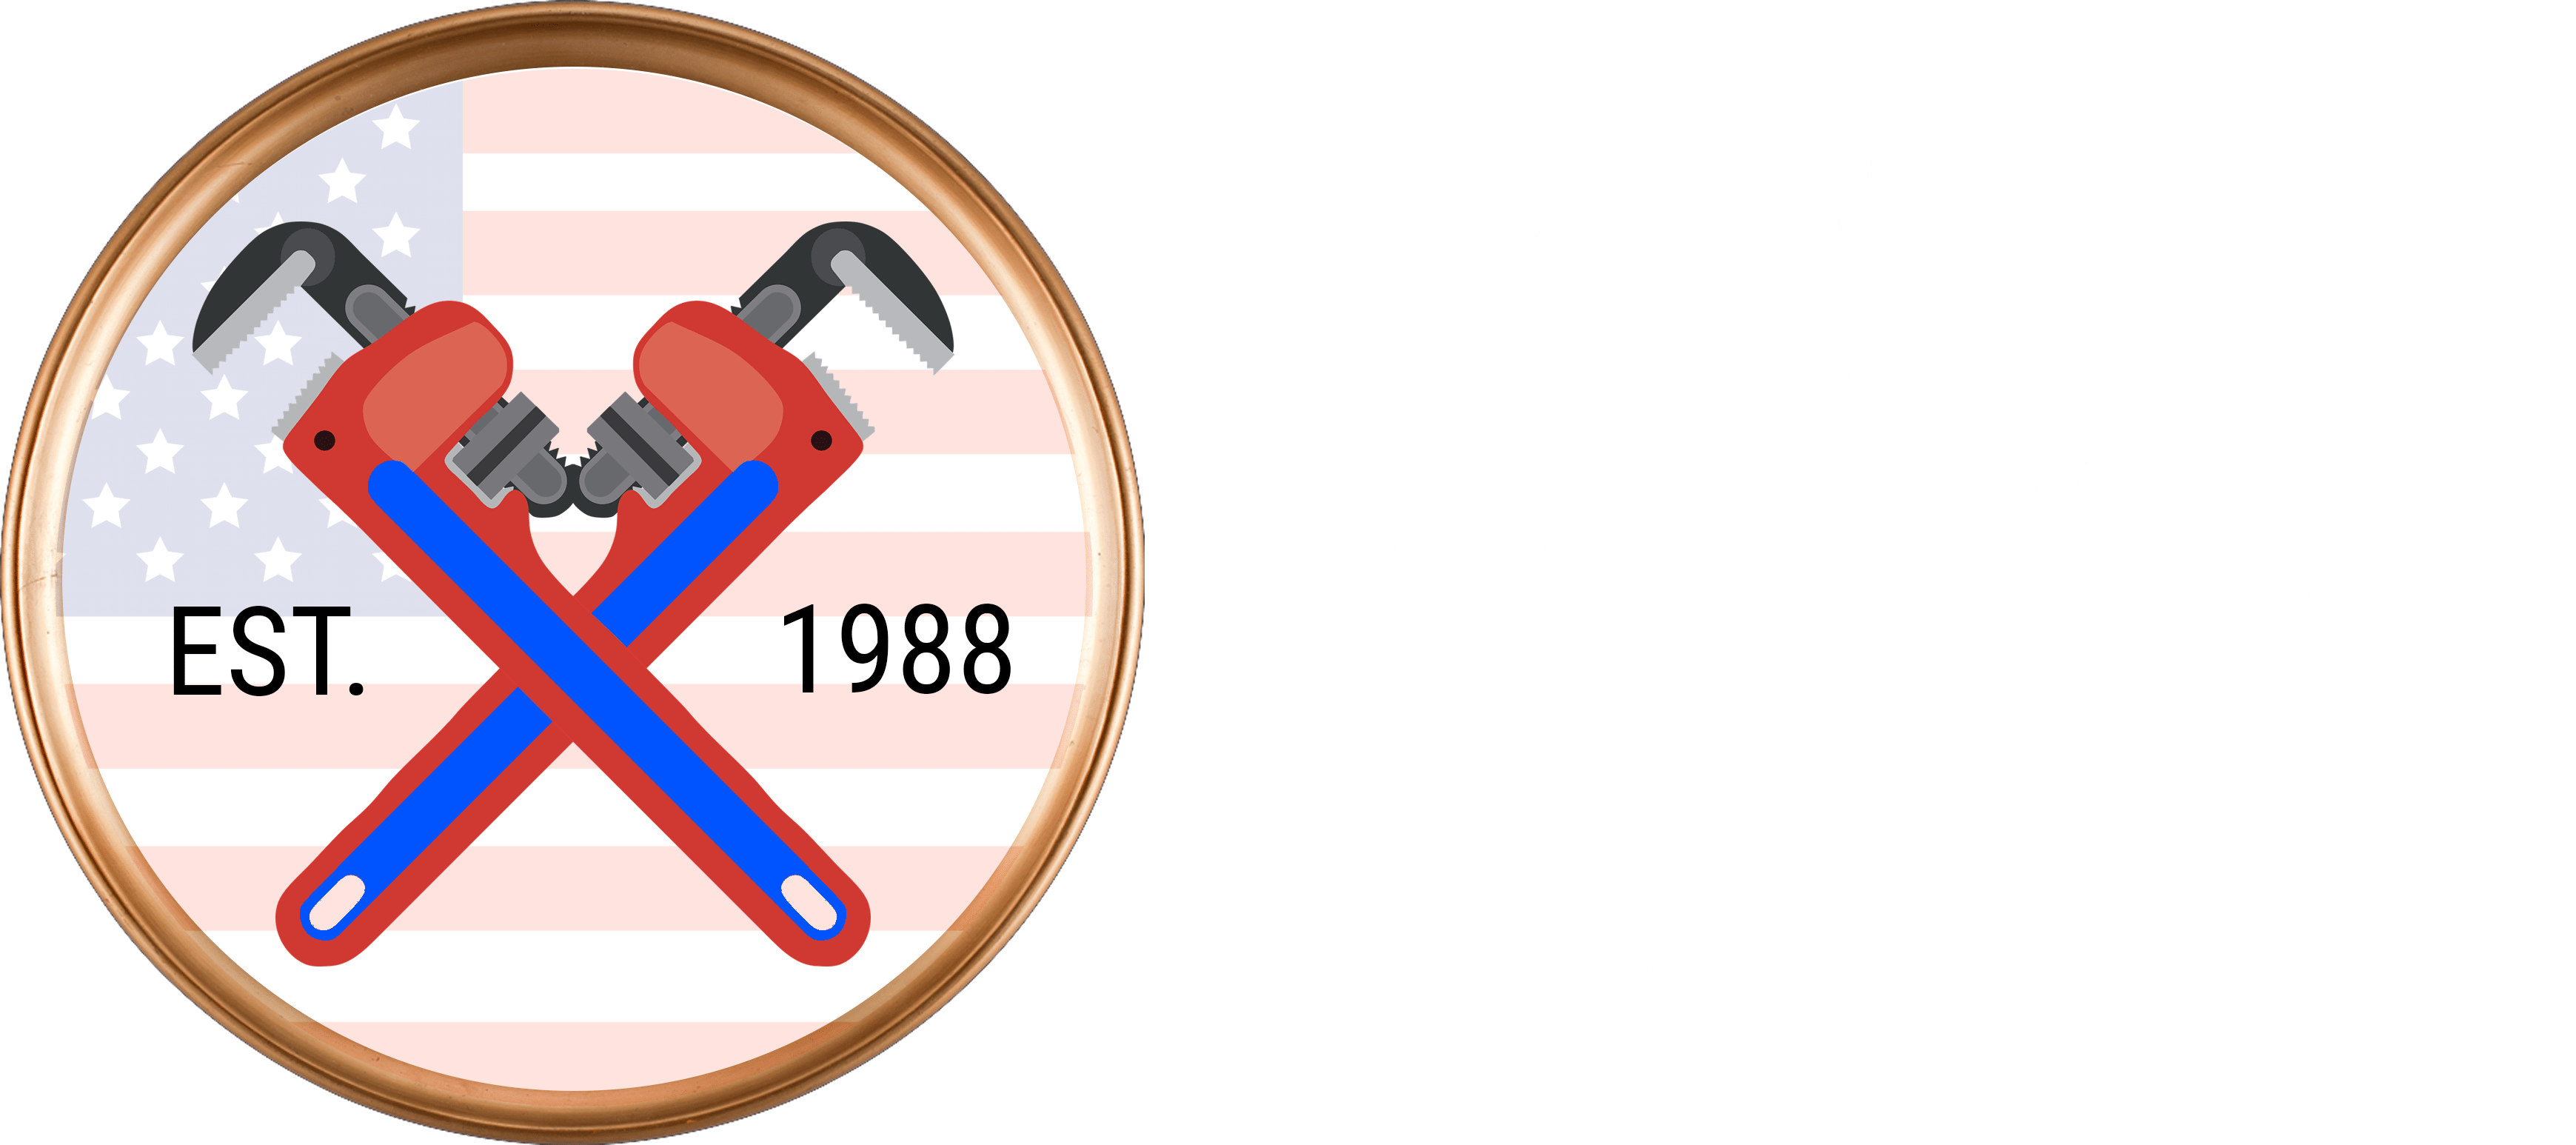 Mikey T’s Plumbing